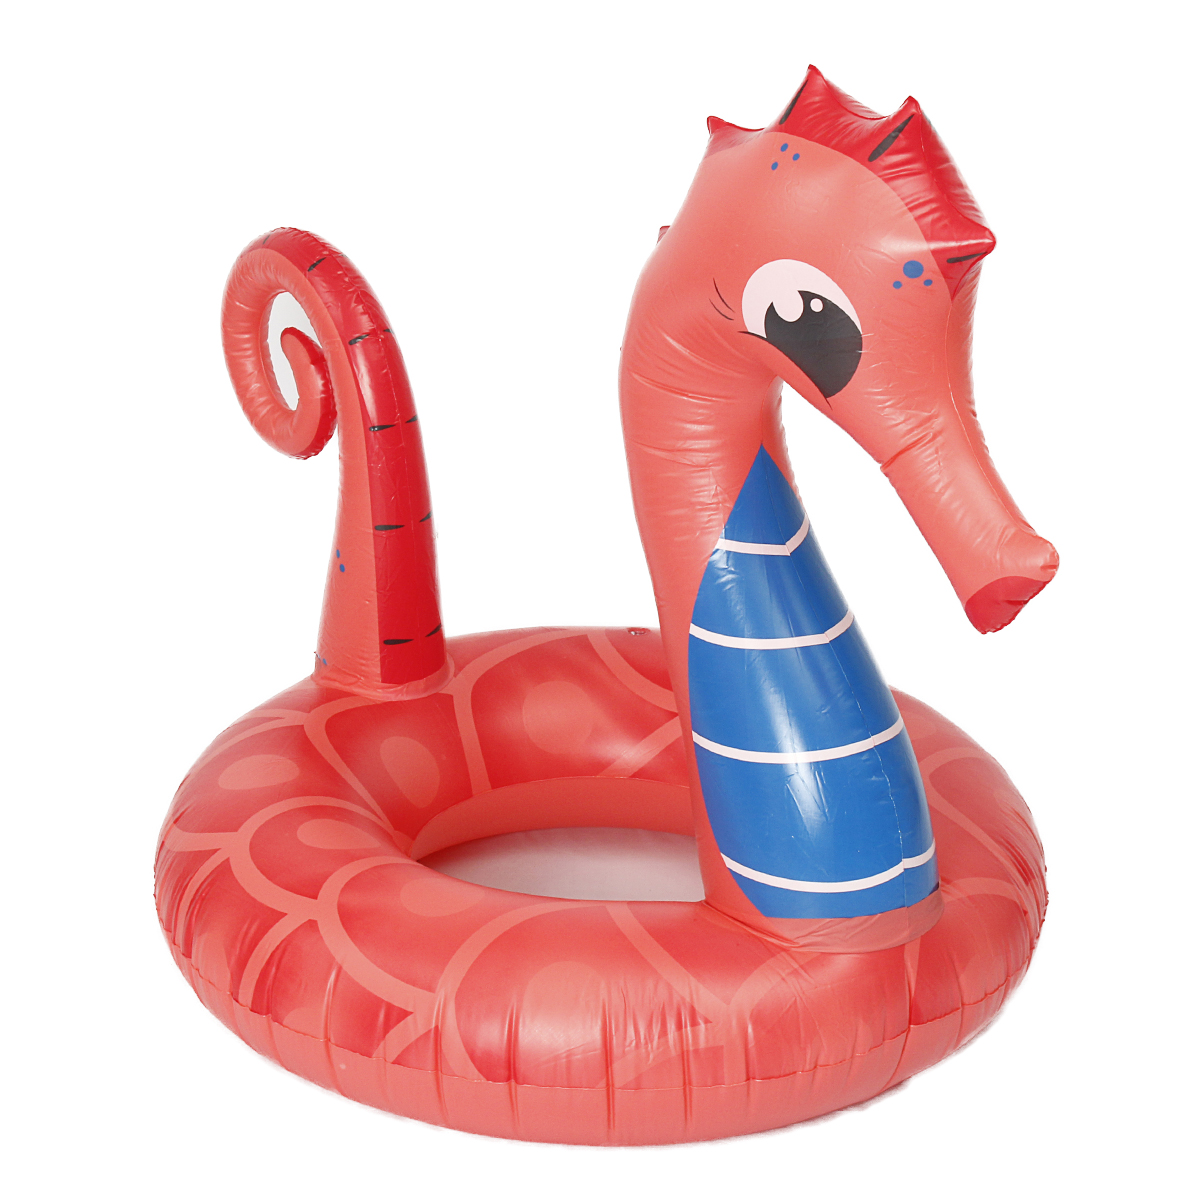 Large-Seahorse-Inflatable-Hippocampus-Giant-Swimming-Pool-Ring-Floats-Bed-Water-Pool-Raft-Camping-Be-1723619-4